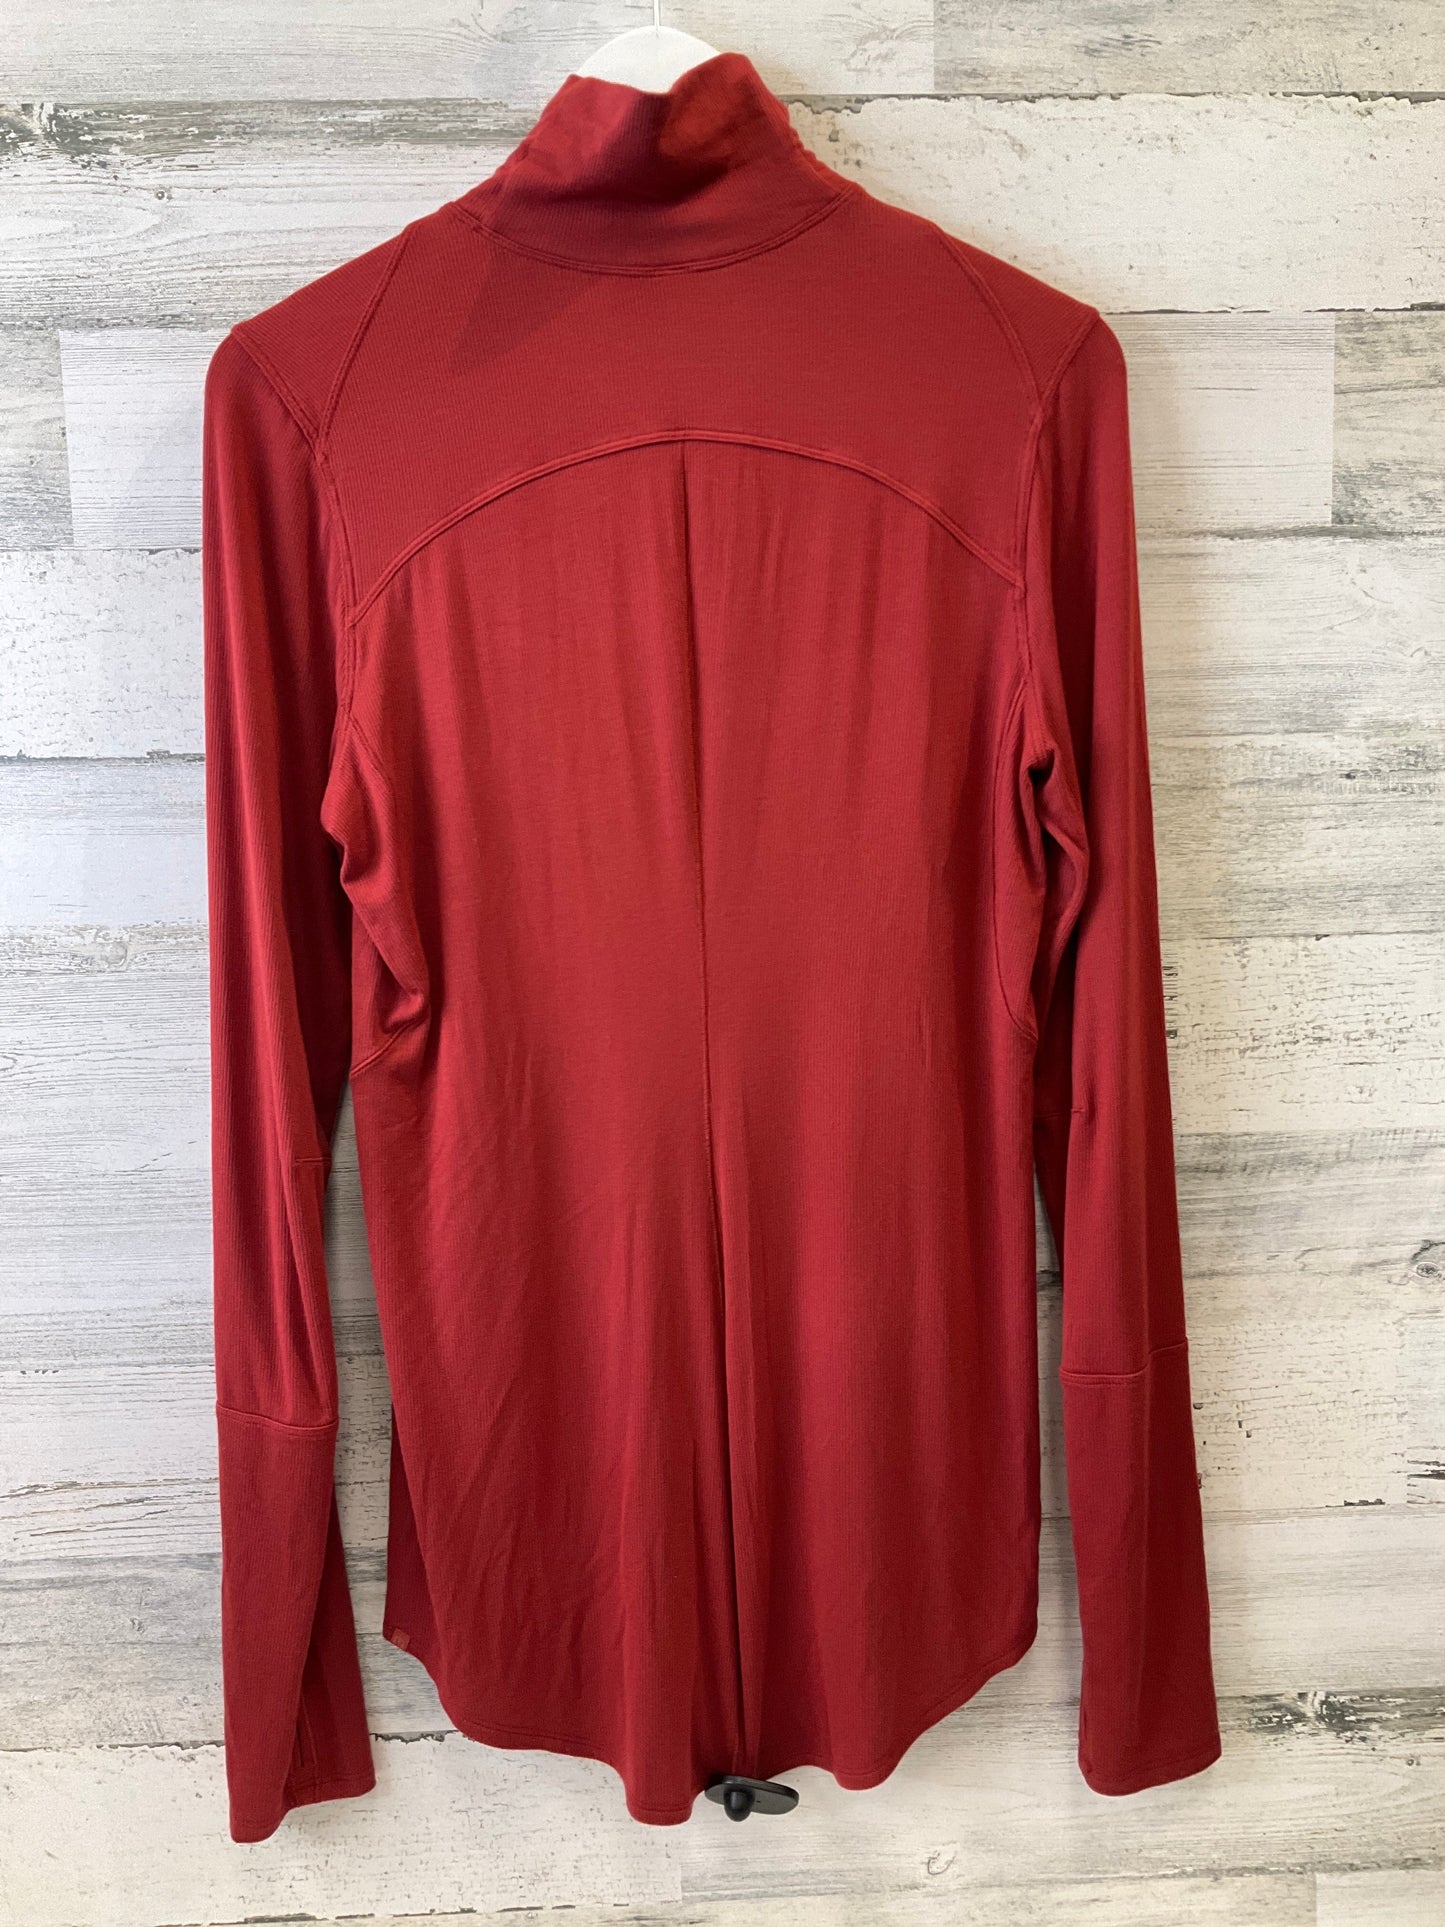 Athletic Top Long Sleeve Collar By Lululemon  Size: Xl